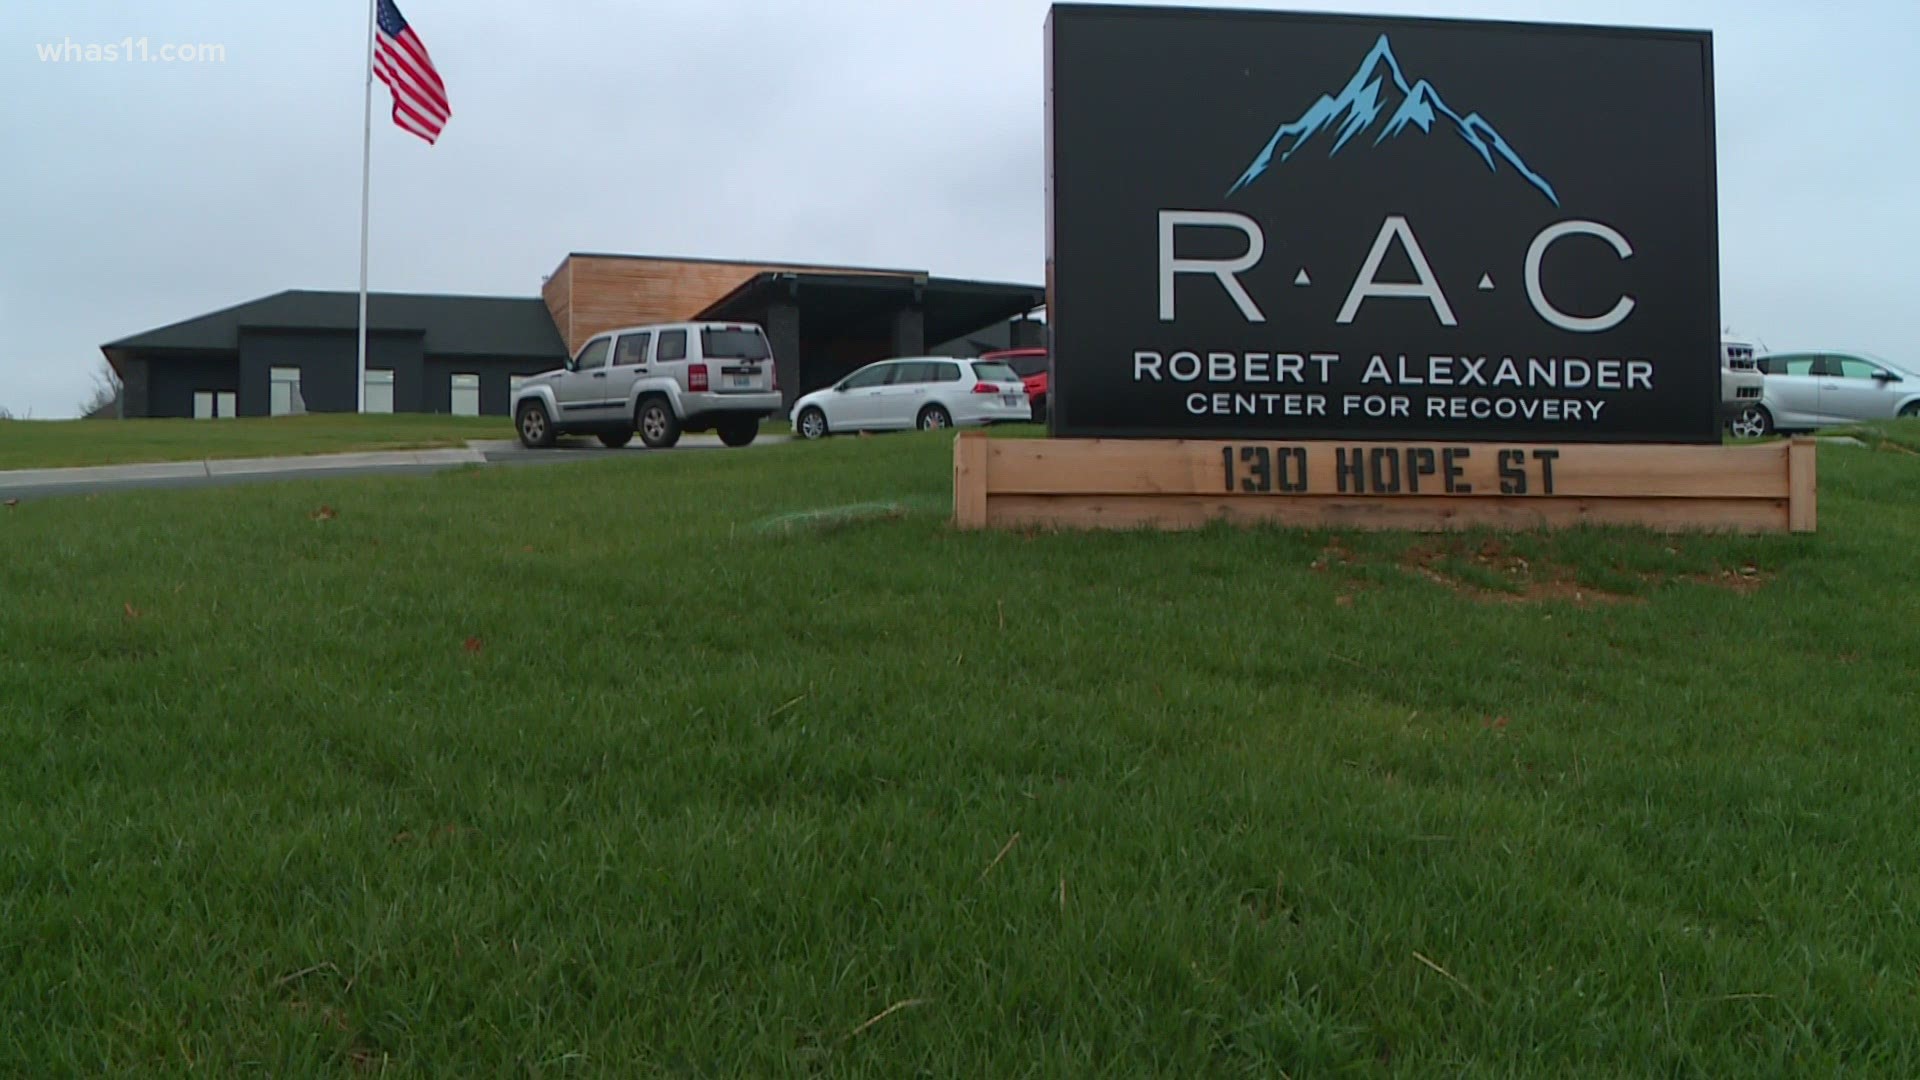 The Robert Alexander Center for recovery is looking to change lives, offer healing and help recovering addicts get on the road to a better life.